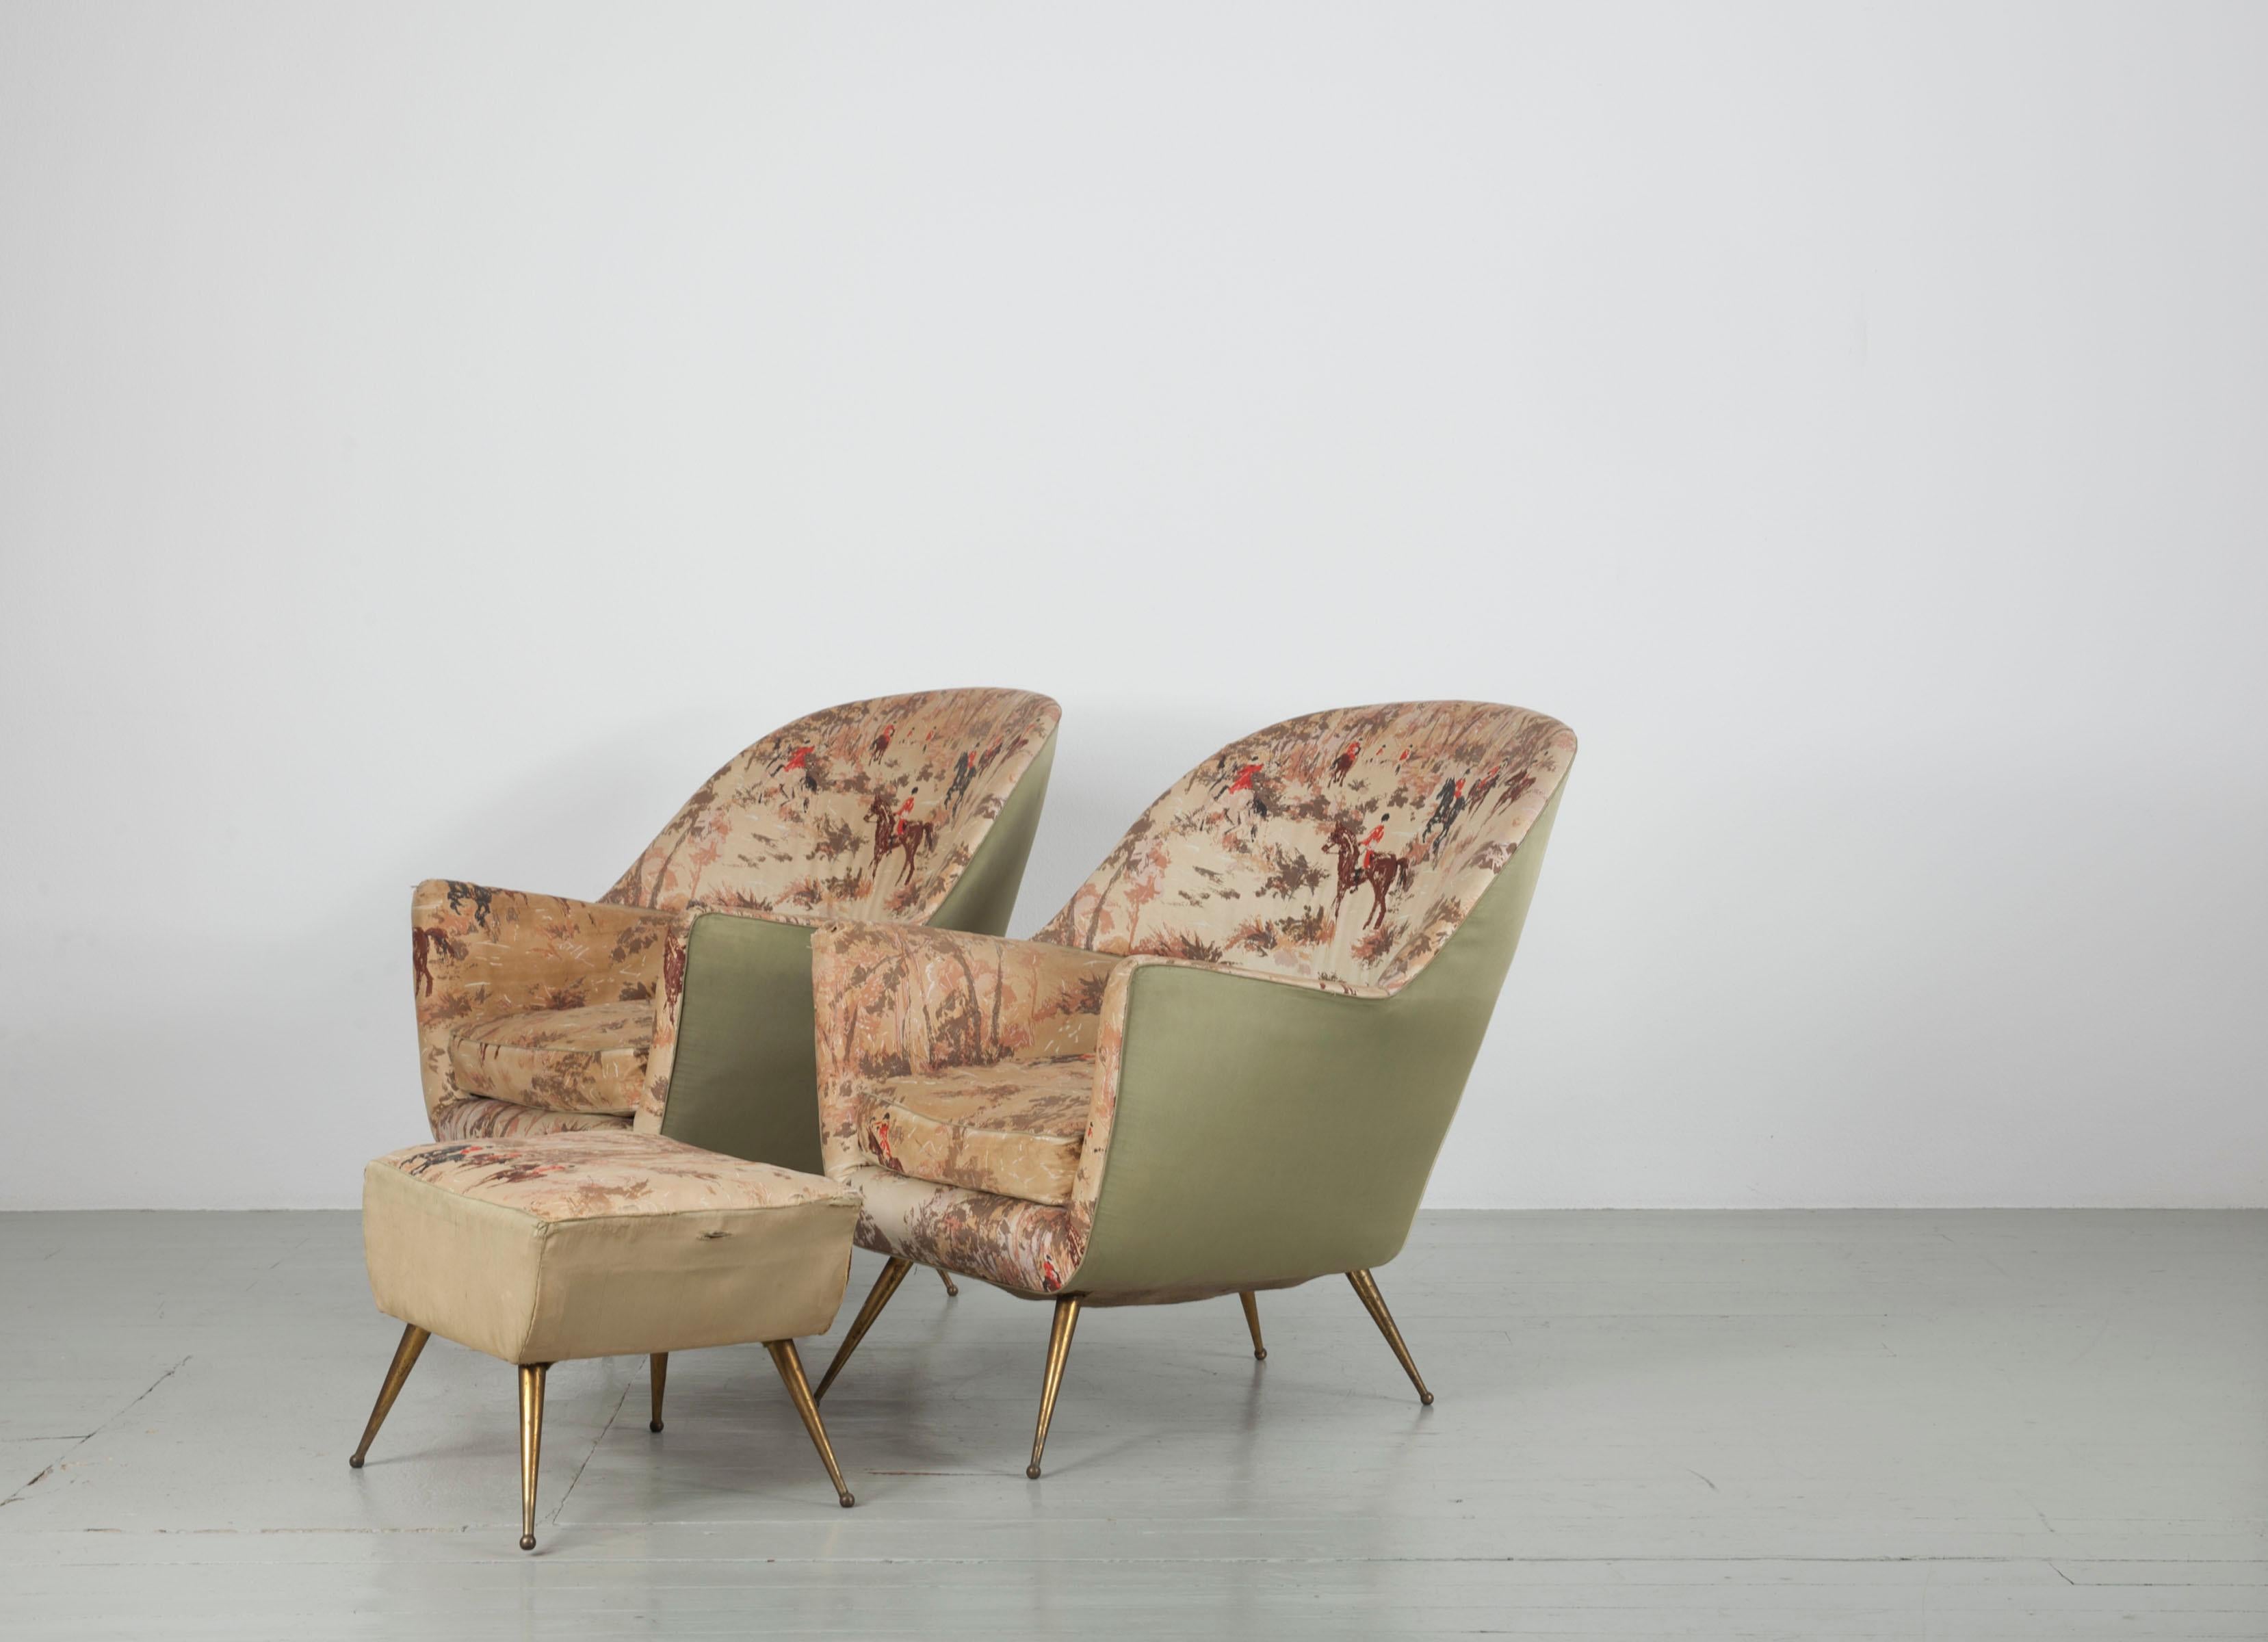 Italian pair of armchairs with brass legs and a footrest. Production I.S.A Bergamo in the 1950s. The armchairs are in the original cover and need new upholstery. 

Measurements stool: H 35, W 50, D 37 cm.